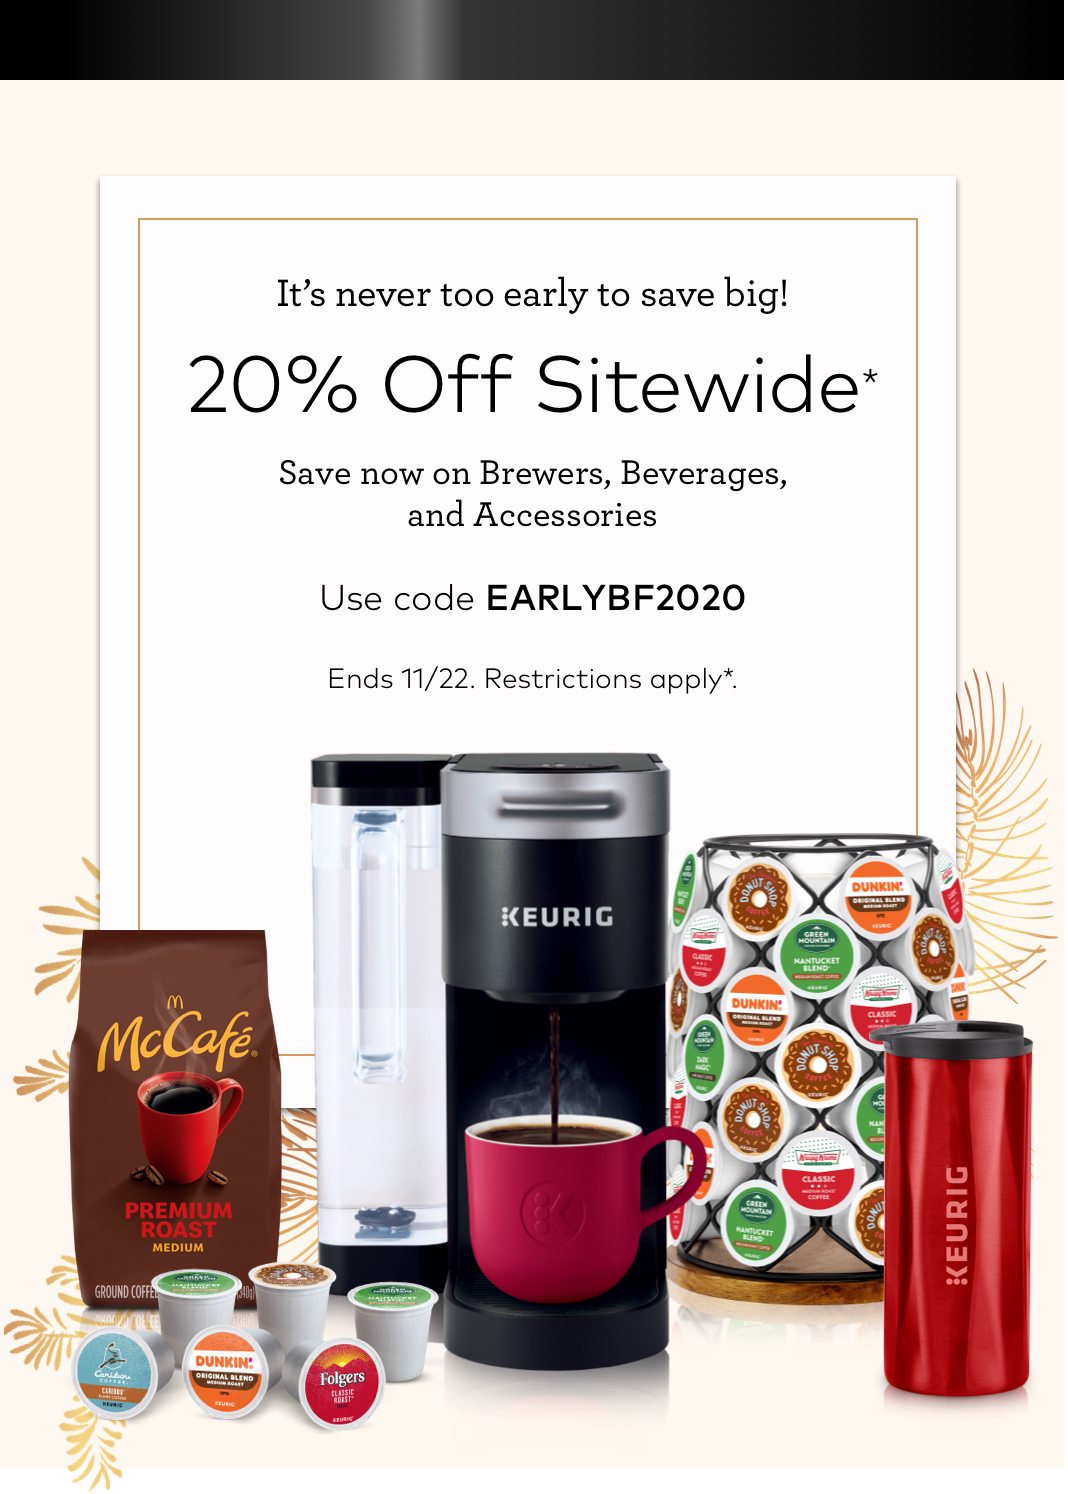 20% off Sitewide with EARLYBF2020